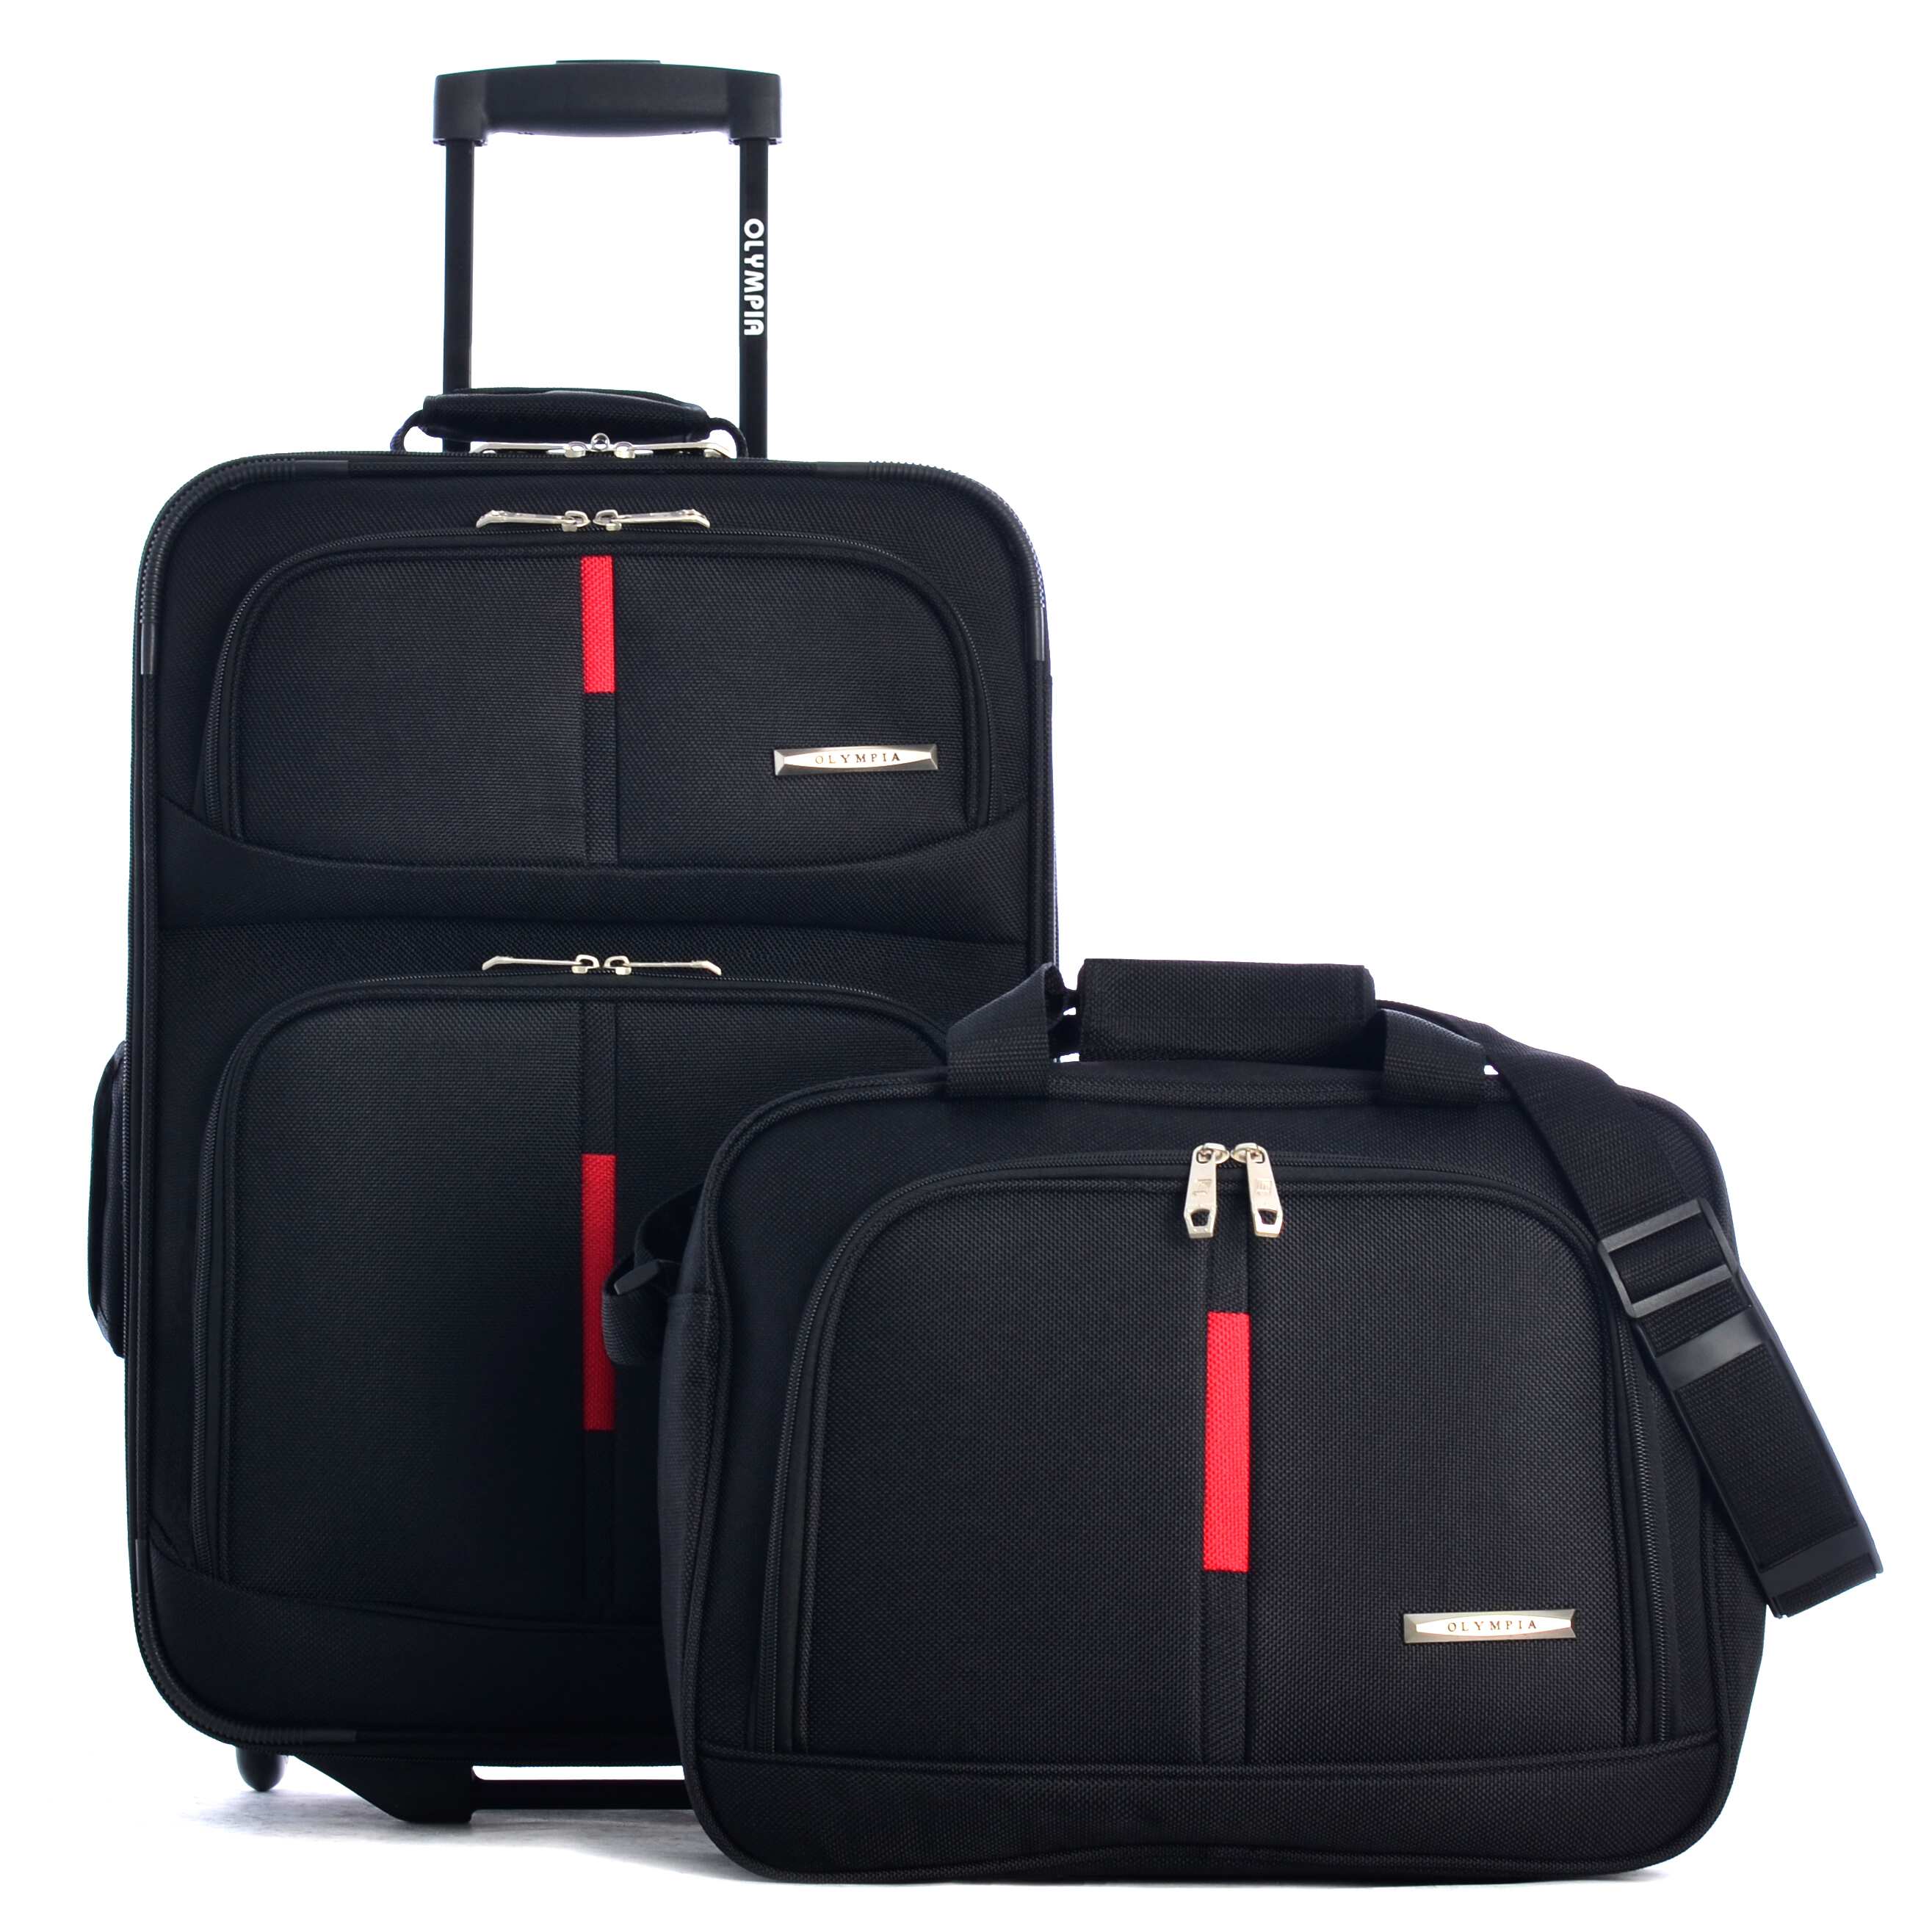 Olympia Manchester 2 piece Black Carry on Luggage Set